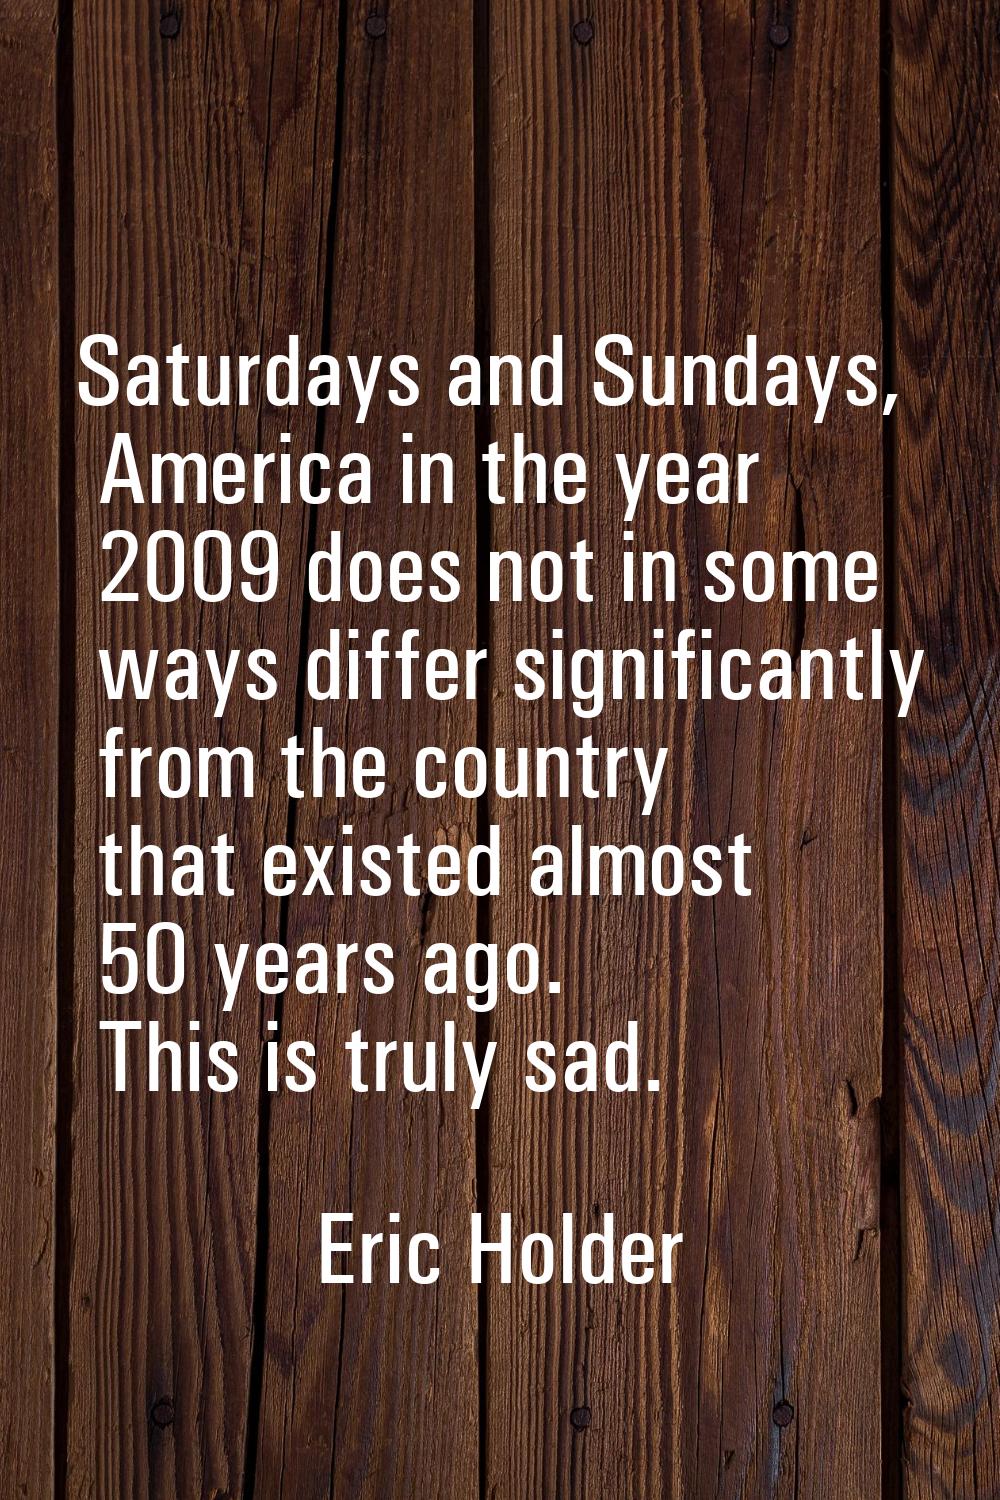 Saturdays and Sundays, America in the year 2009 does not in some ways differ significantly from the